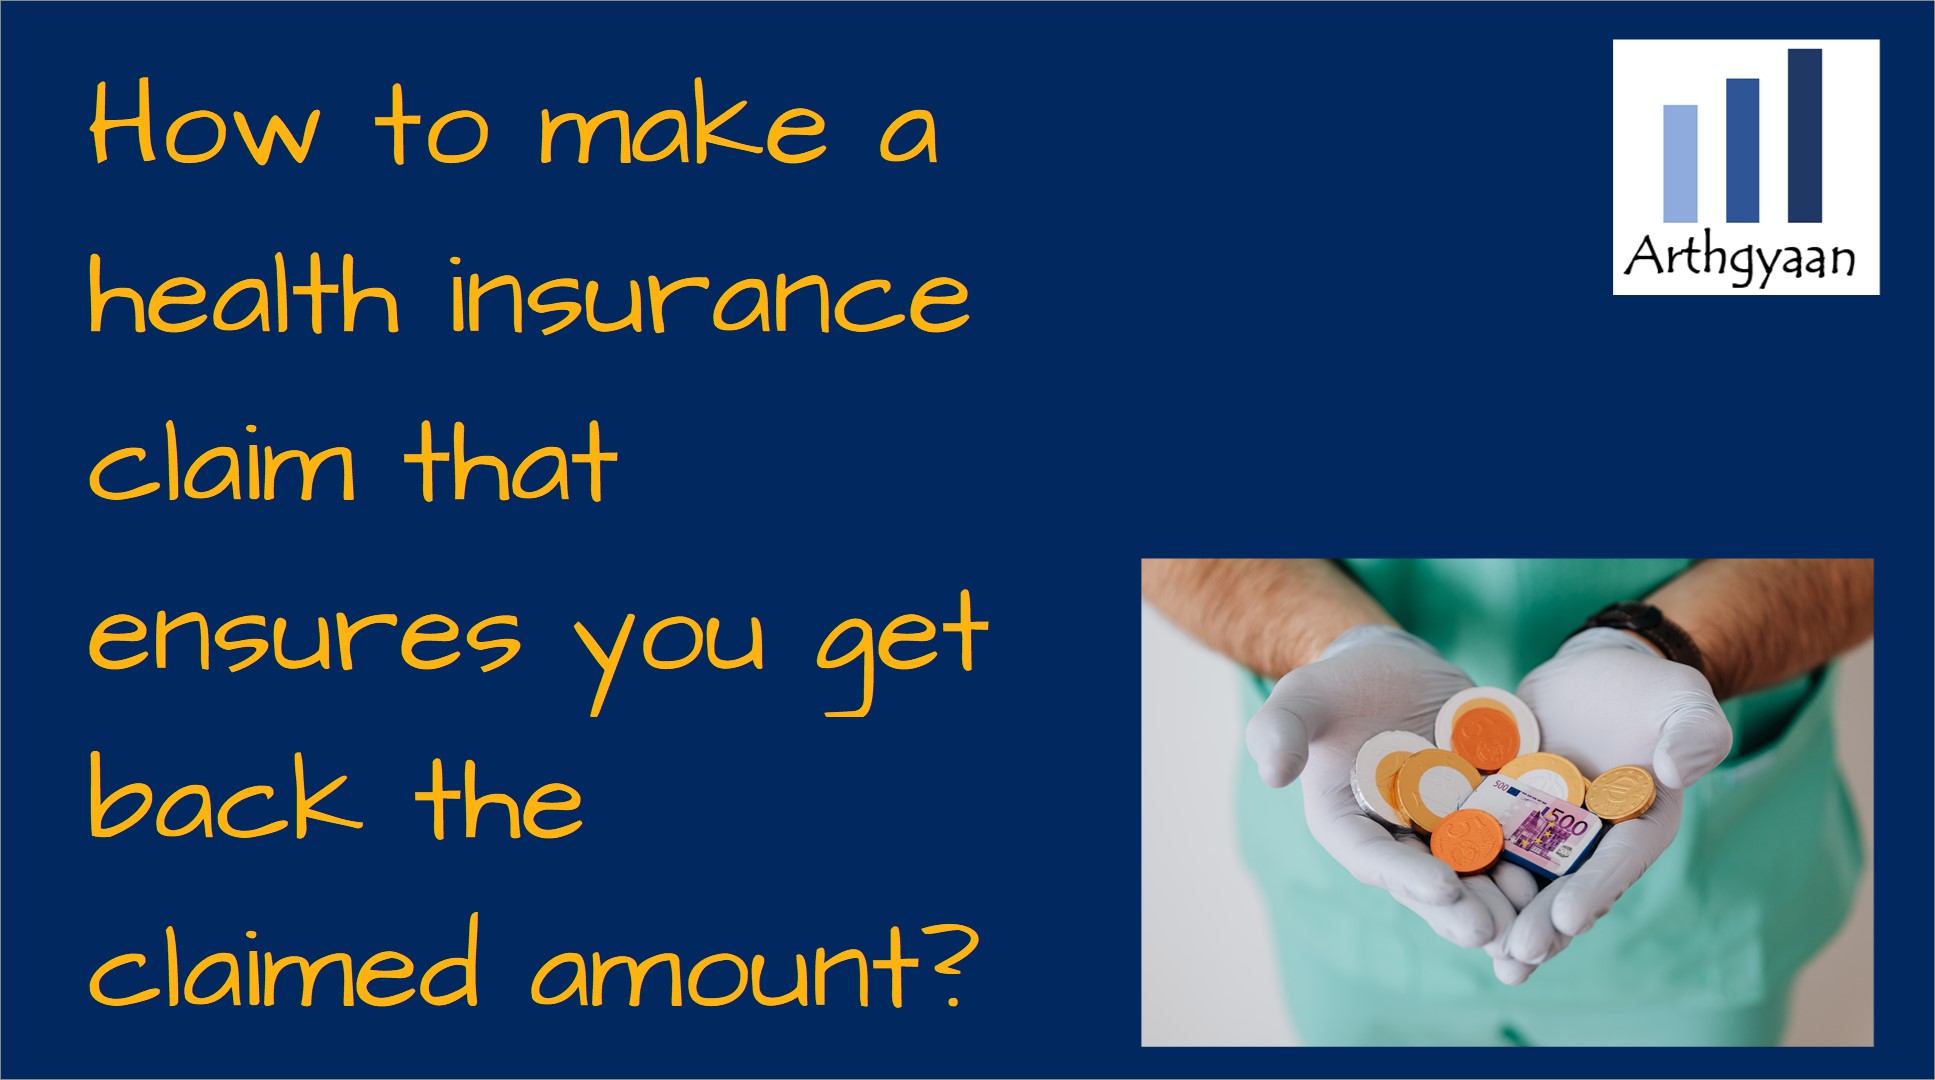 How to make a health insurance claim that ensures you get back the claimed amount?